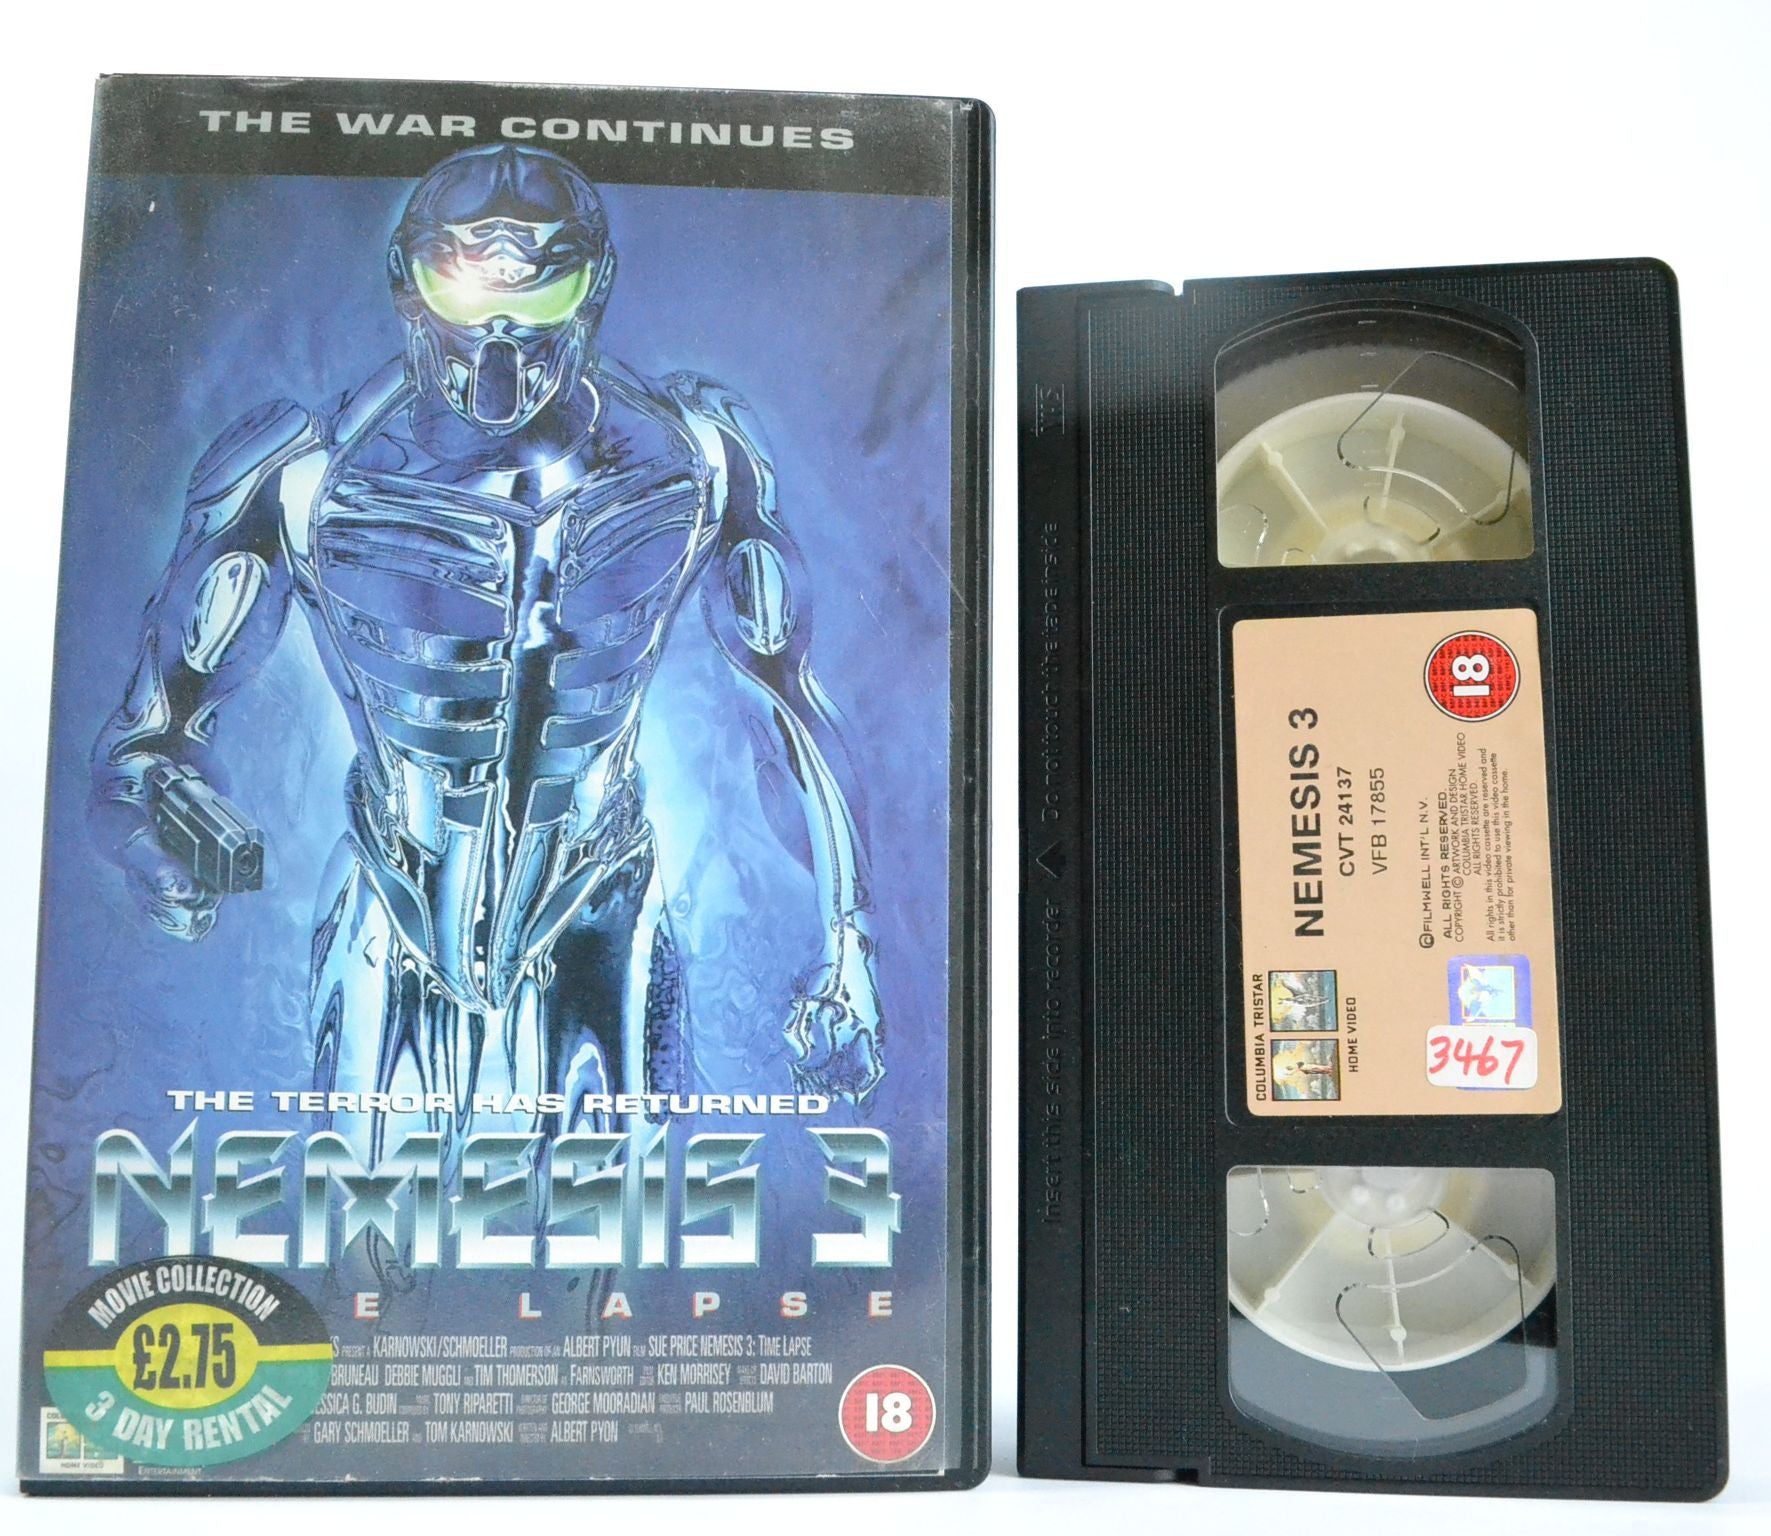 Nemesis 3: Time Lapse / Prey Harder [Mutant Warrior/Hungry Cyborgs] Large - OOP VHS-